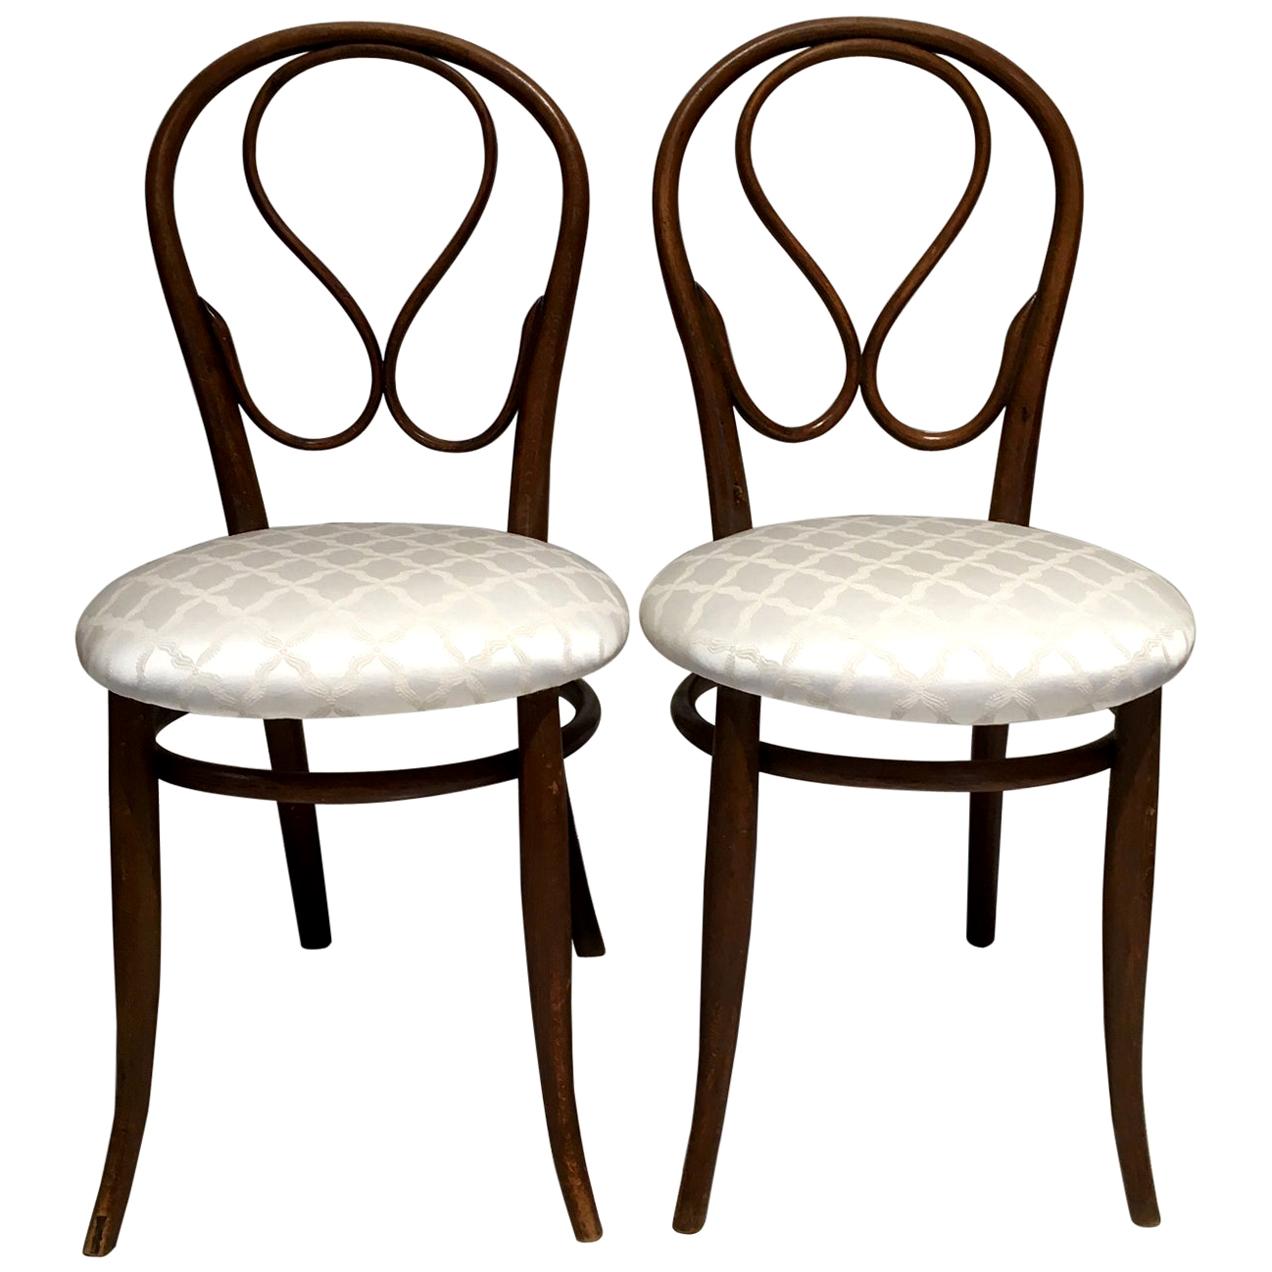 Pair of August Thonet Bentwood Chairs by Thonet Bros